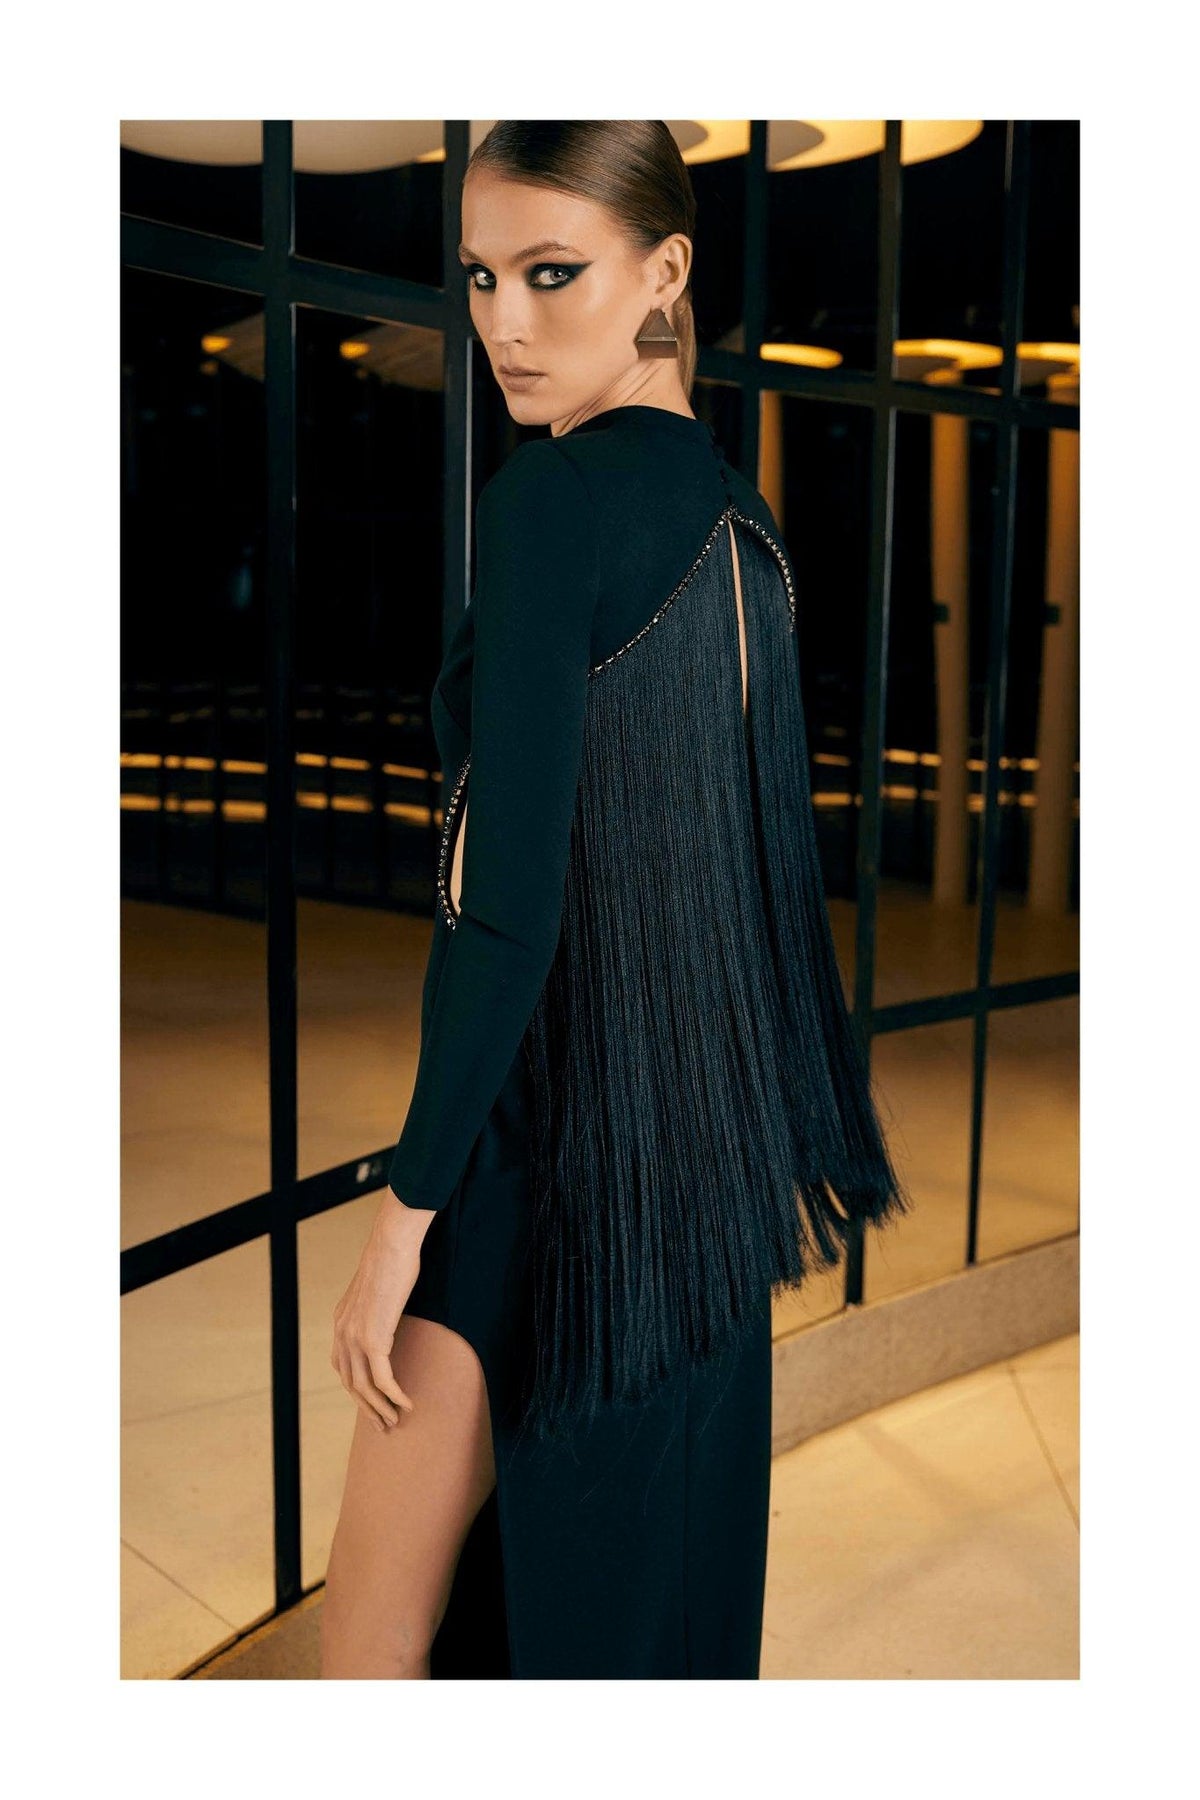 Long Black Dress With Cutouts, Open Back & Fringes - Spring in Summer